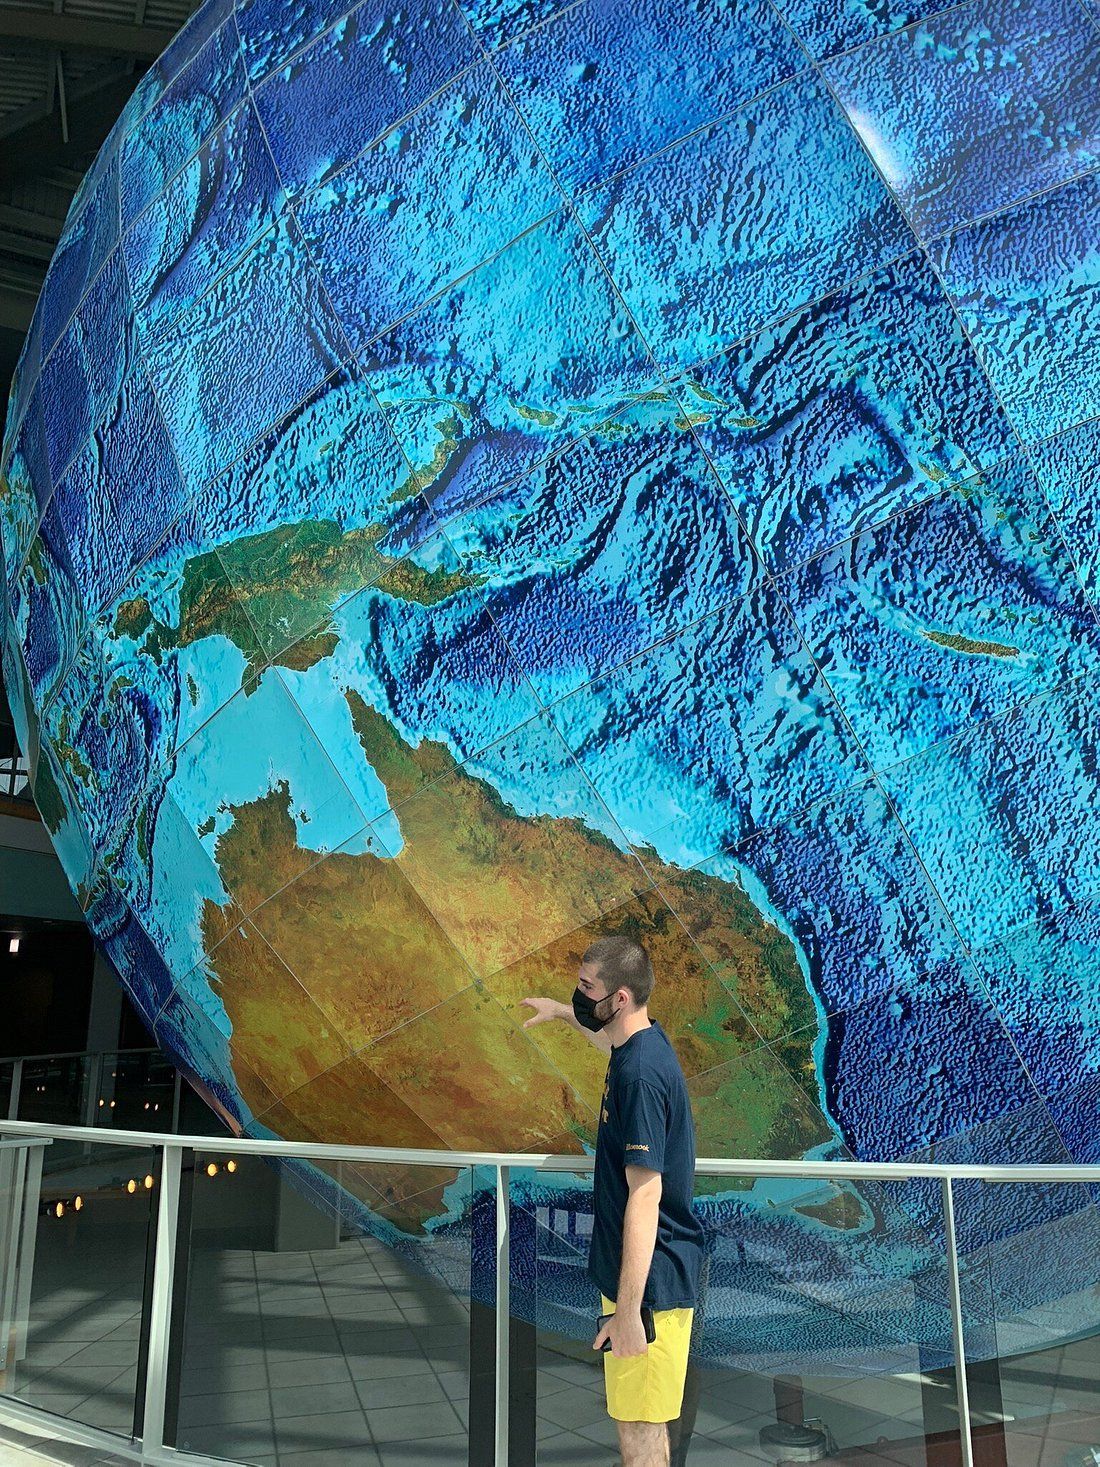 World's Largest Rotating and Revolving Globe, world record in Yarmouth, Maine